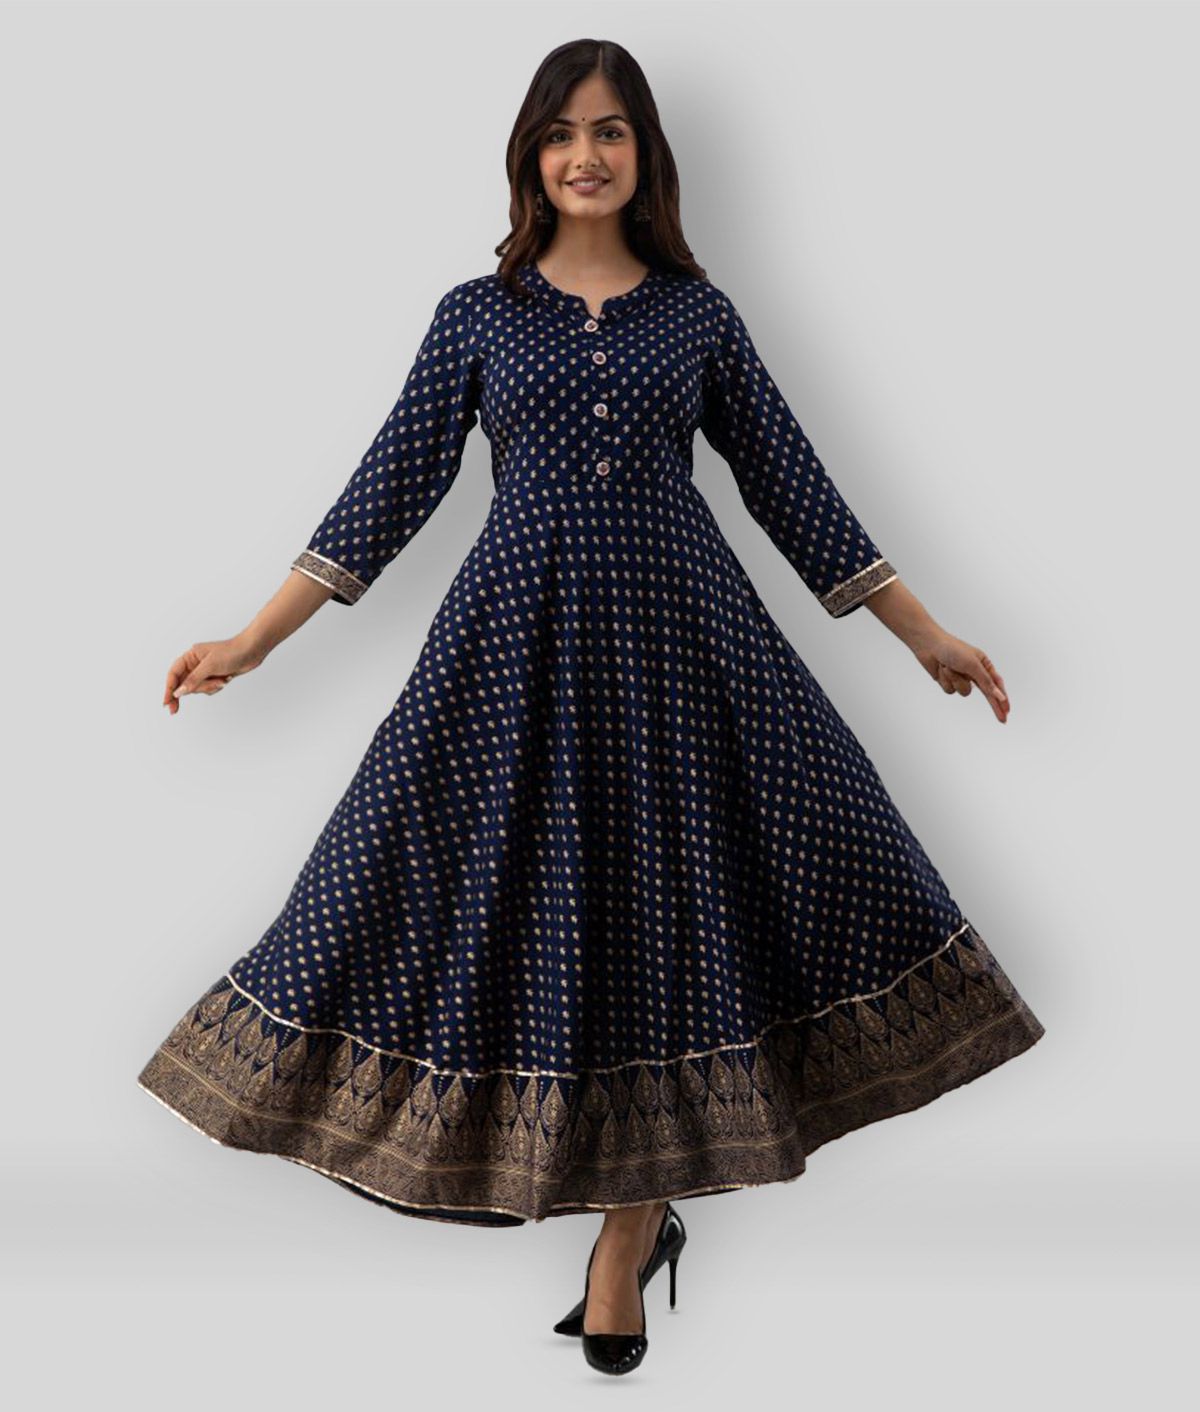 FASHEIN Black Polyester Anarkali Kurti  Single  Buy FASHEIN Black  Polyester Anarkali Kurti  Single Online at Best Prices in India on Snapdeal